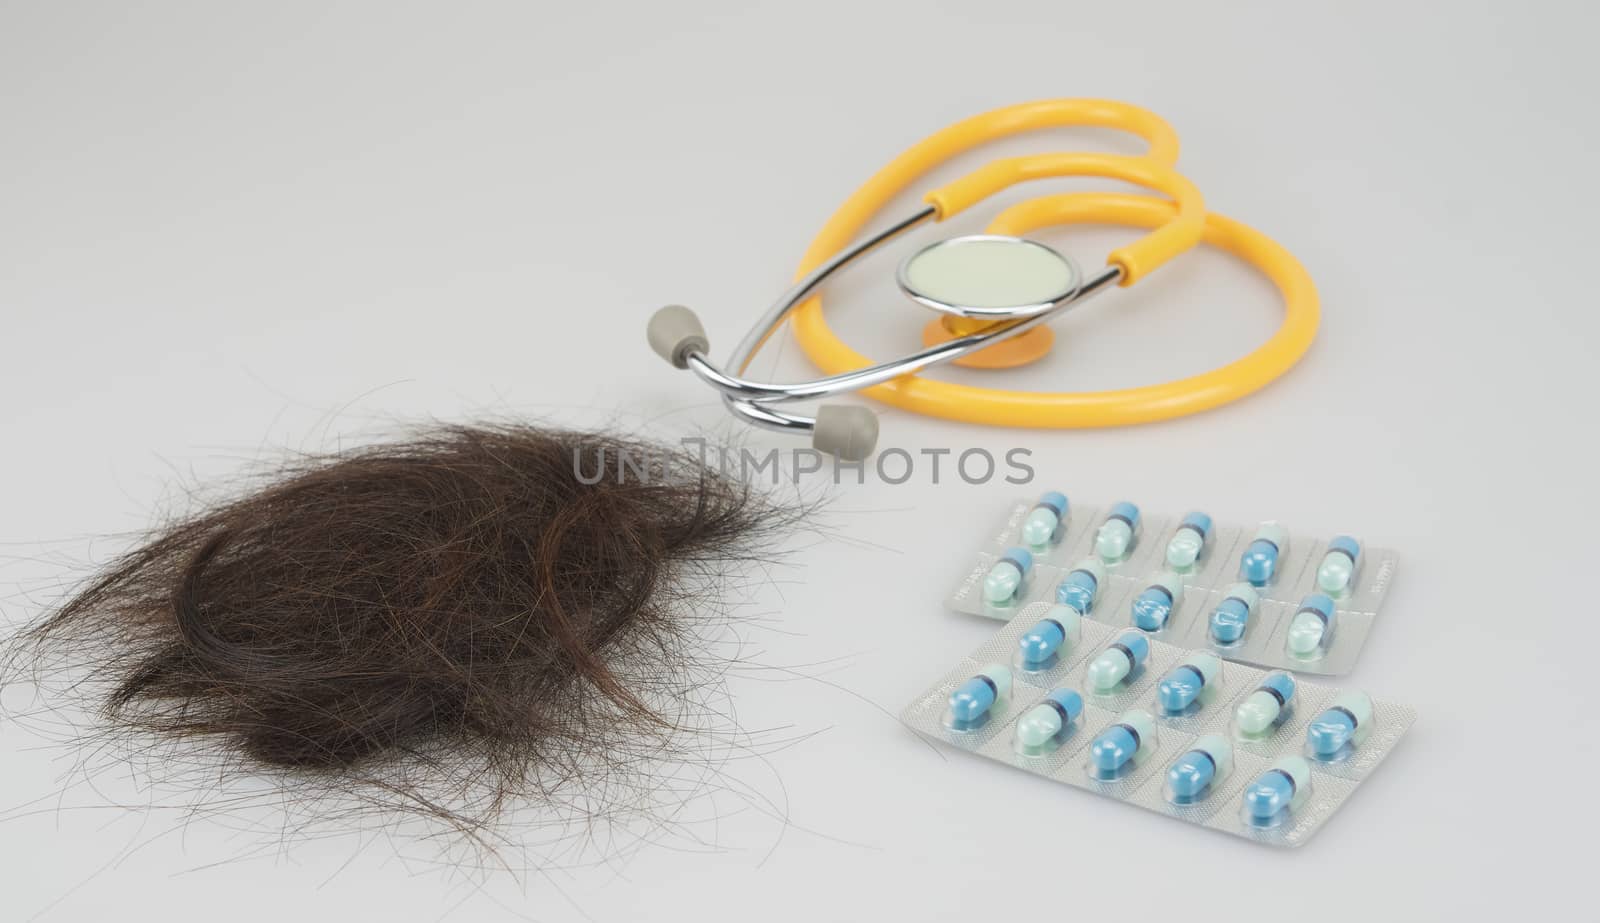 Brown lost hair with stethoscope and medicine placed on white background.